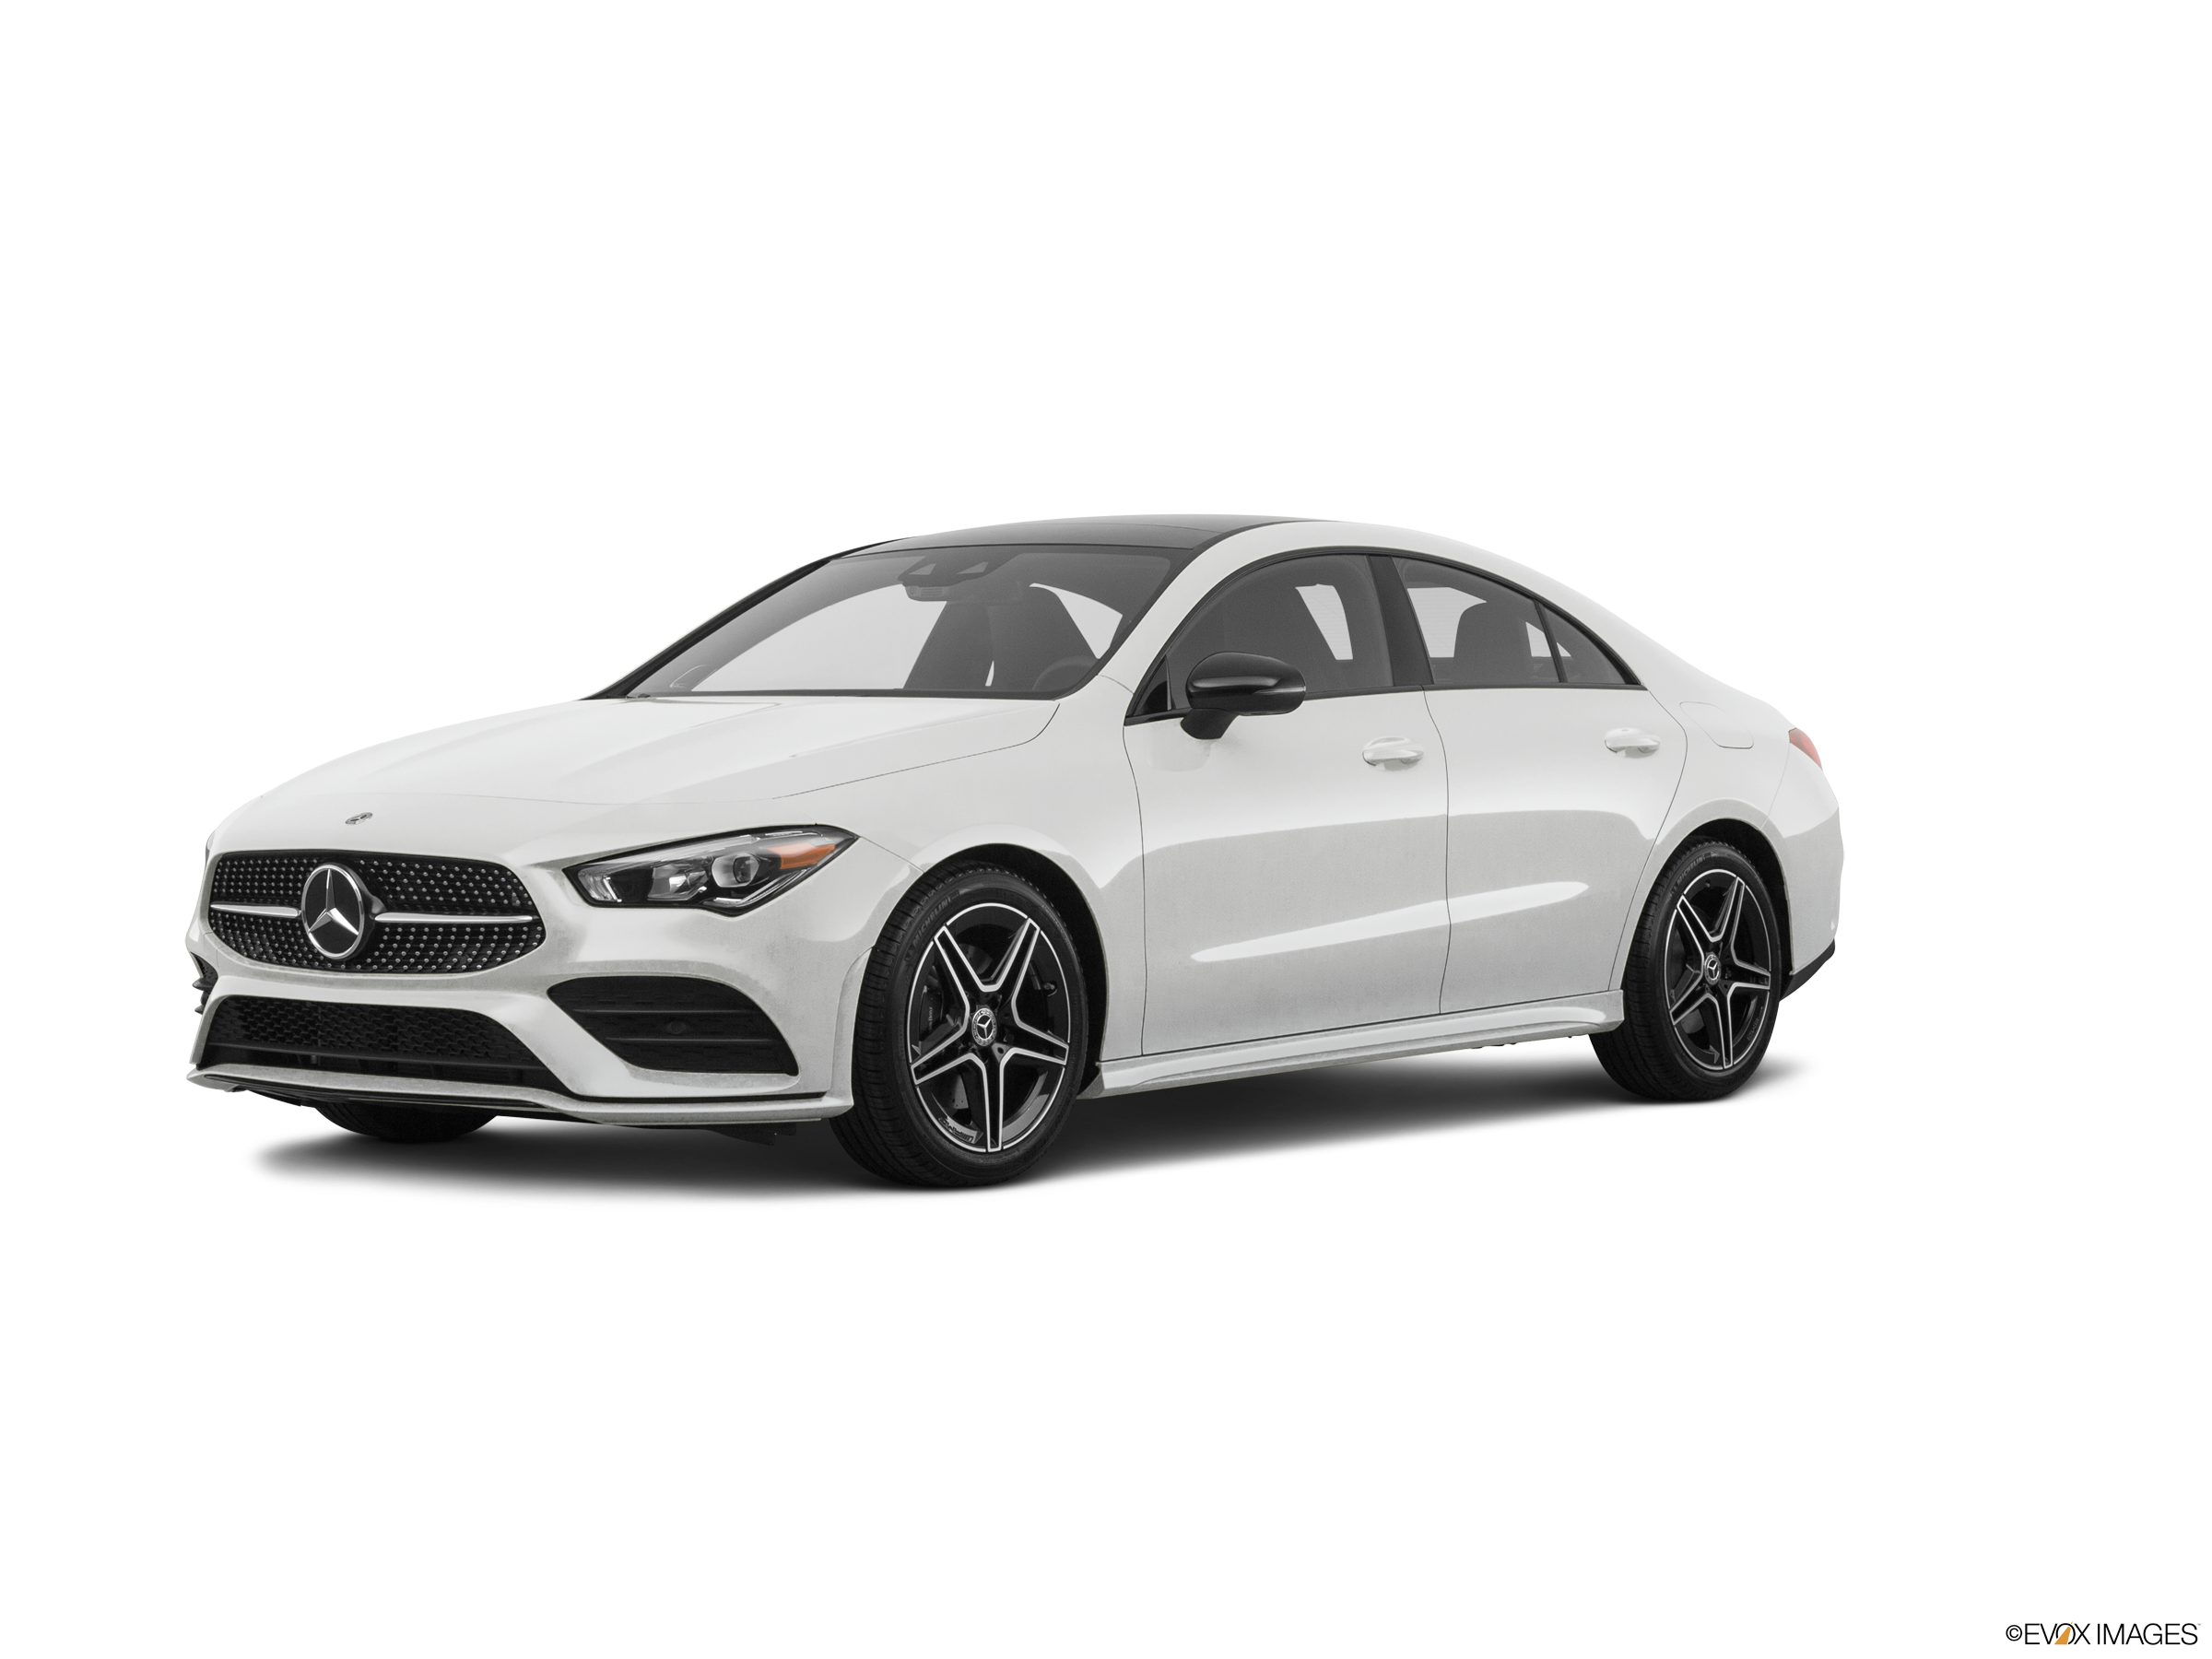 2020 Mercedes-Benz CLA - New Compact Four-Door Coupe